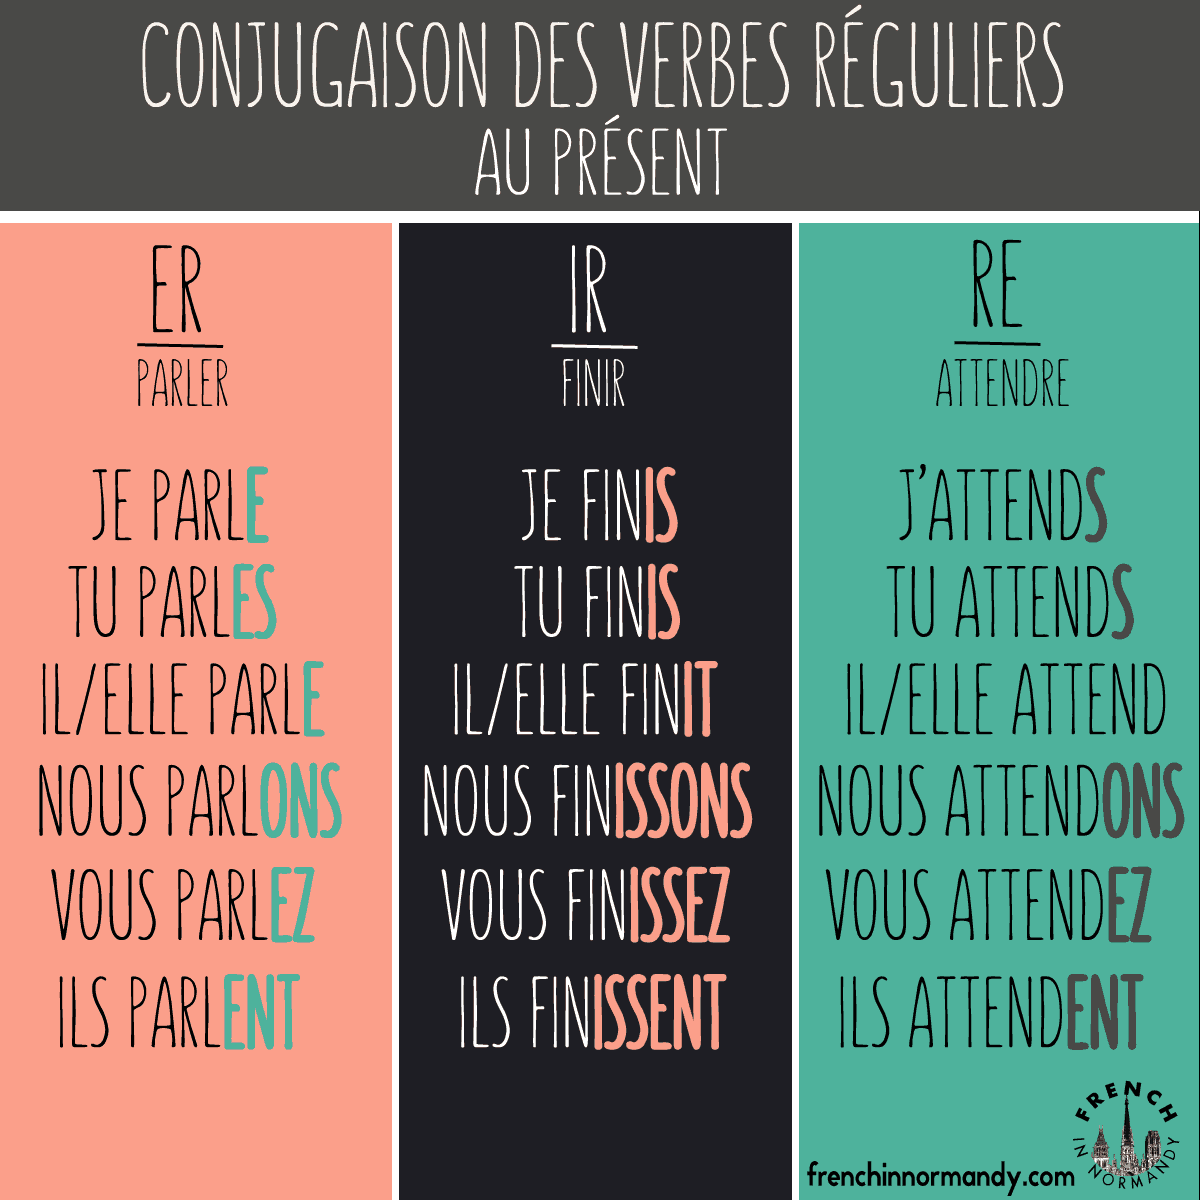 learn-french-5-how-to-conjugate-regular-verbs-in-french